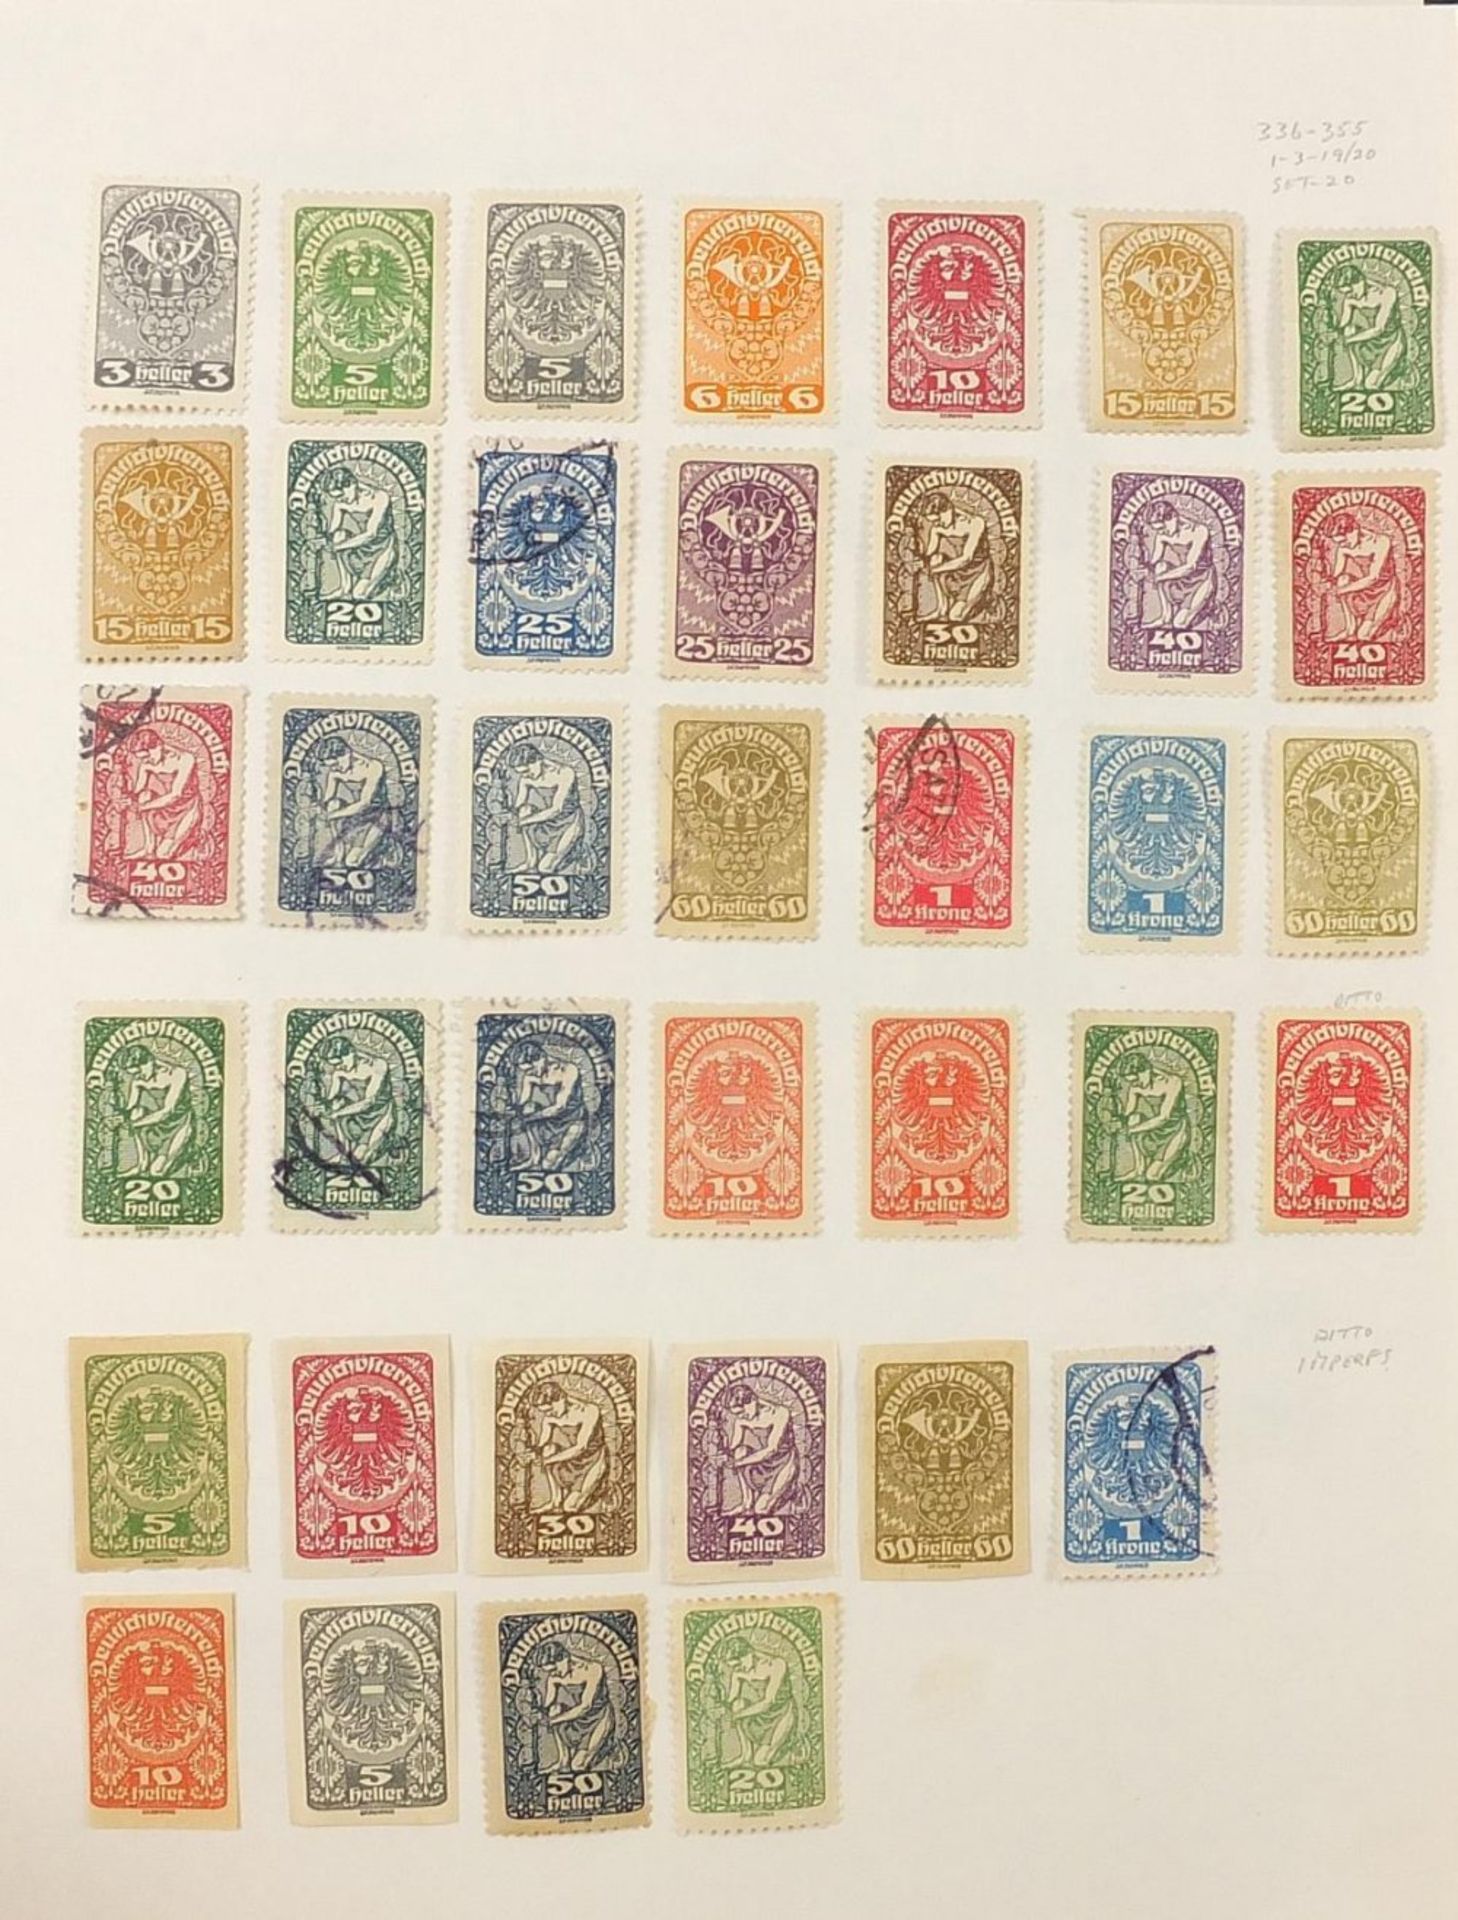 Extensive collection of antique and later world stamps arranged in albums including Brazil, - Image 46 of 52